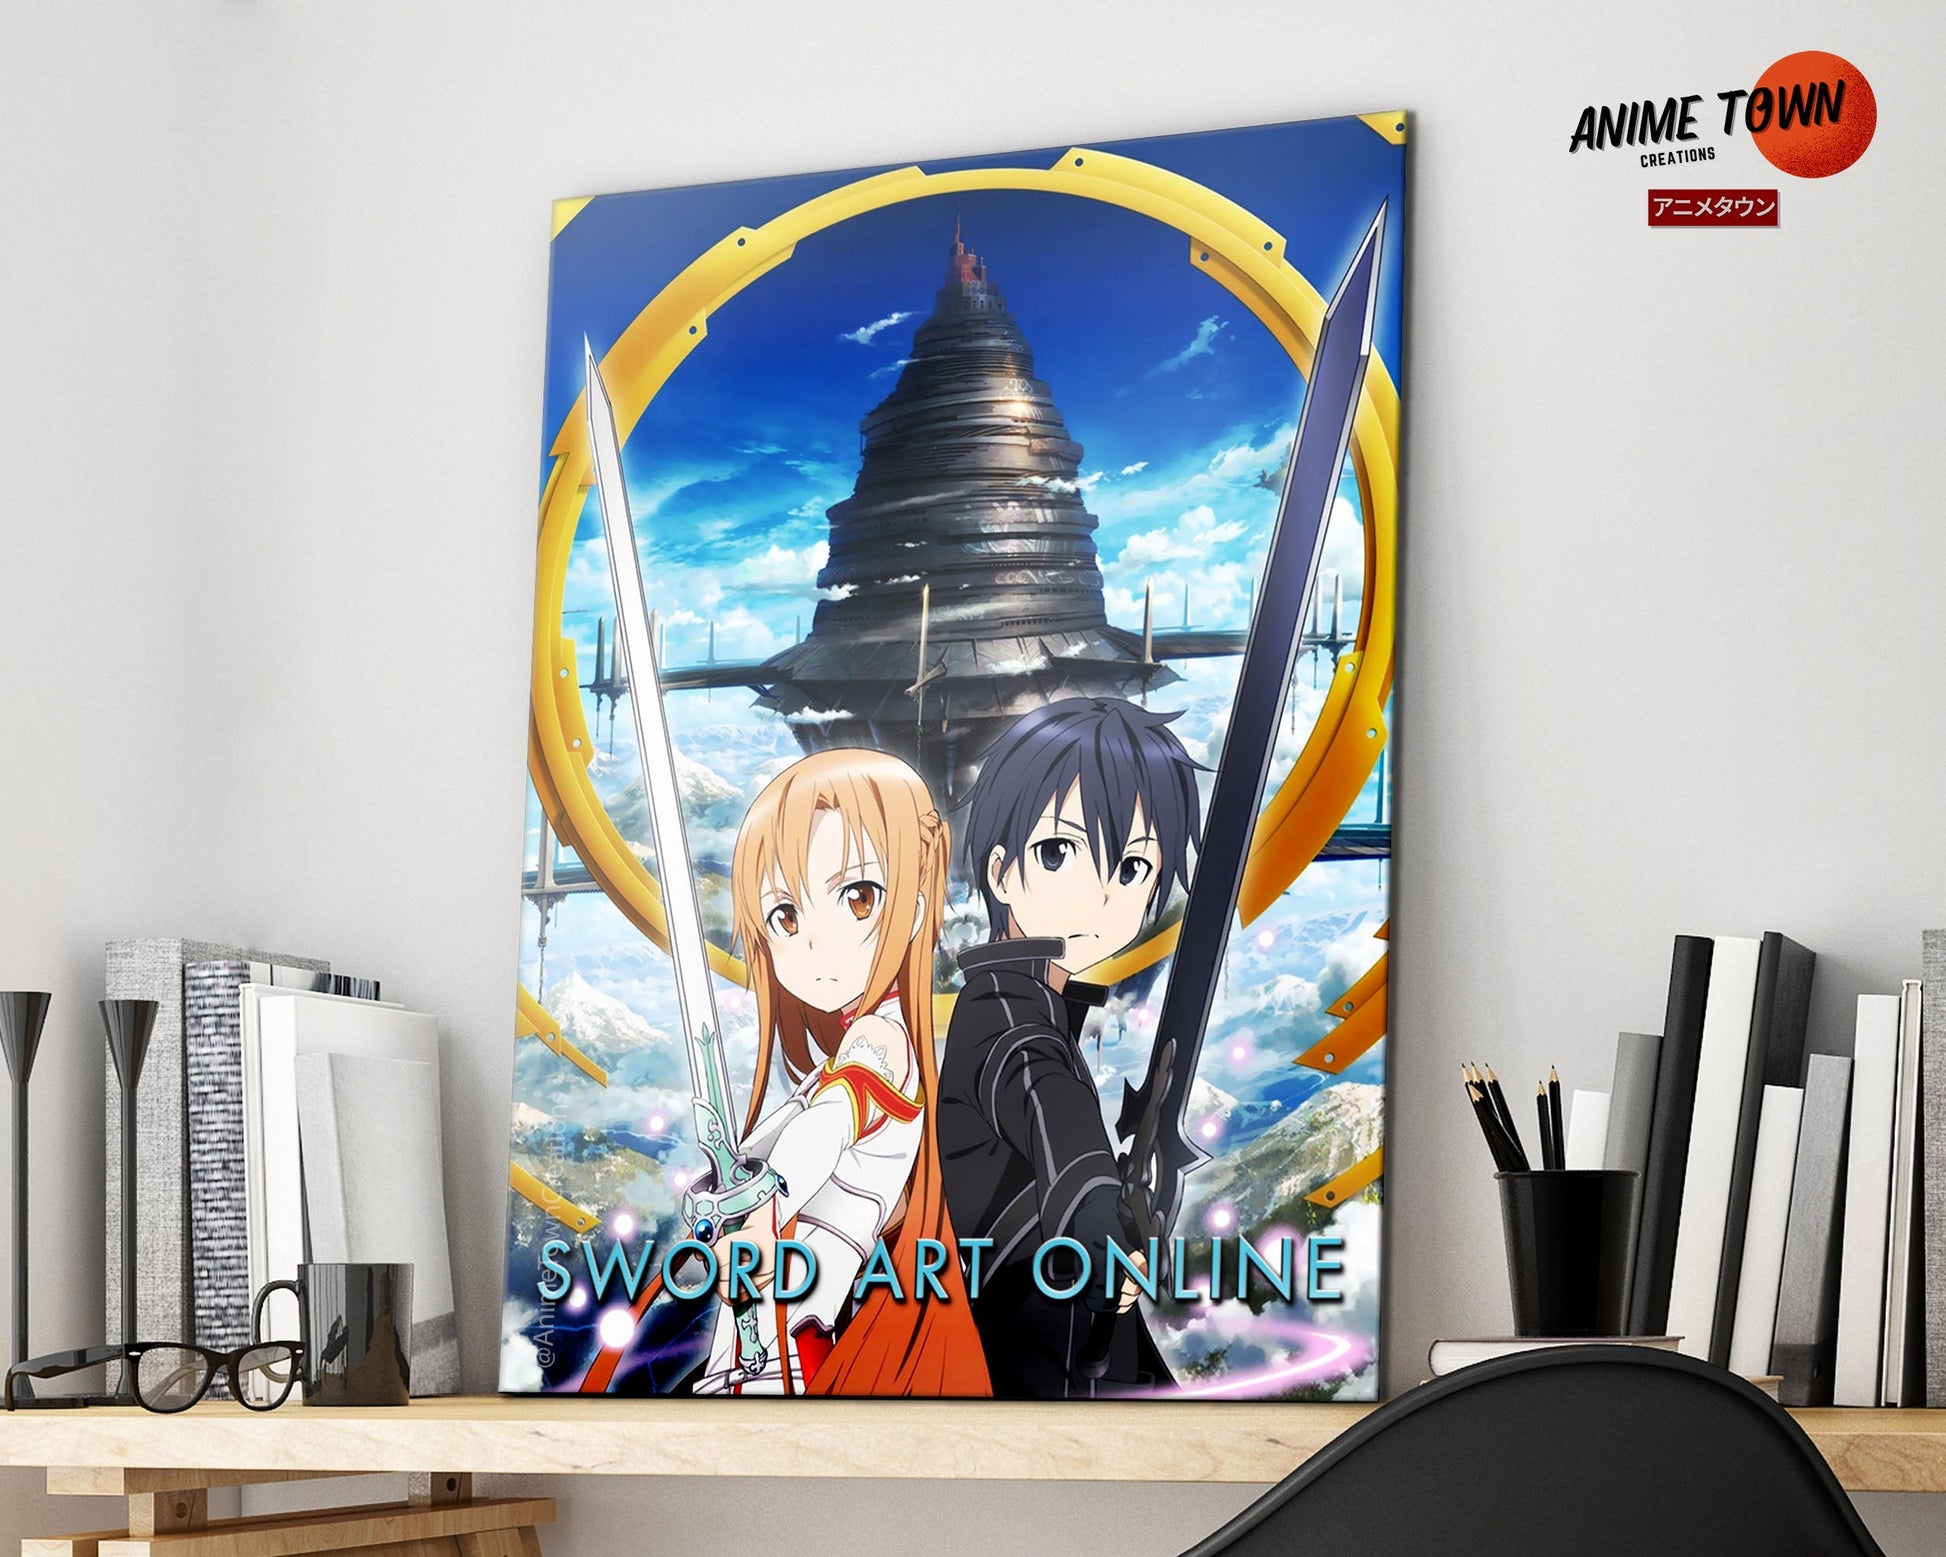 Anime Town Creations Metal Poster Sword Art Online 11" x 17" Home Goods - Anime Spy x Family Metal Poster